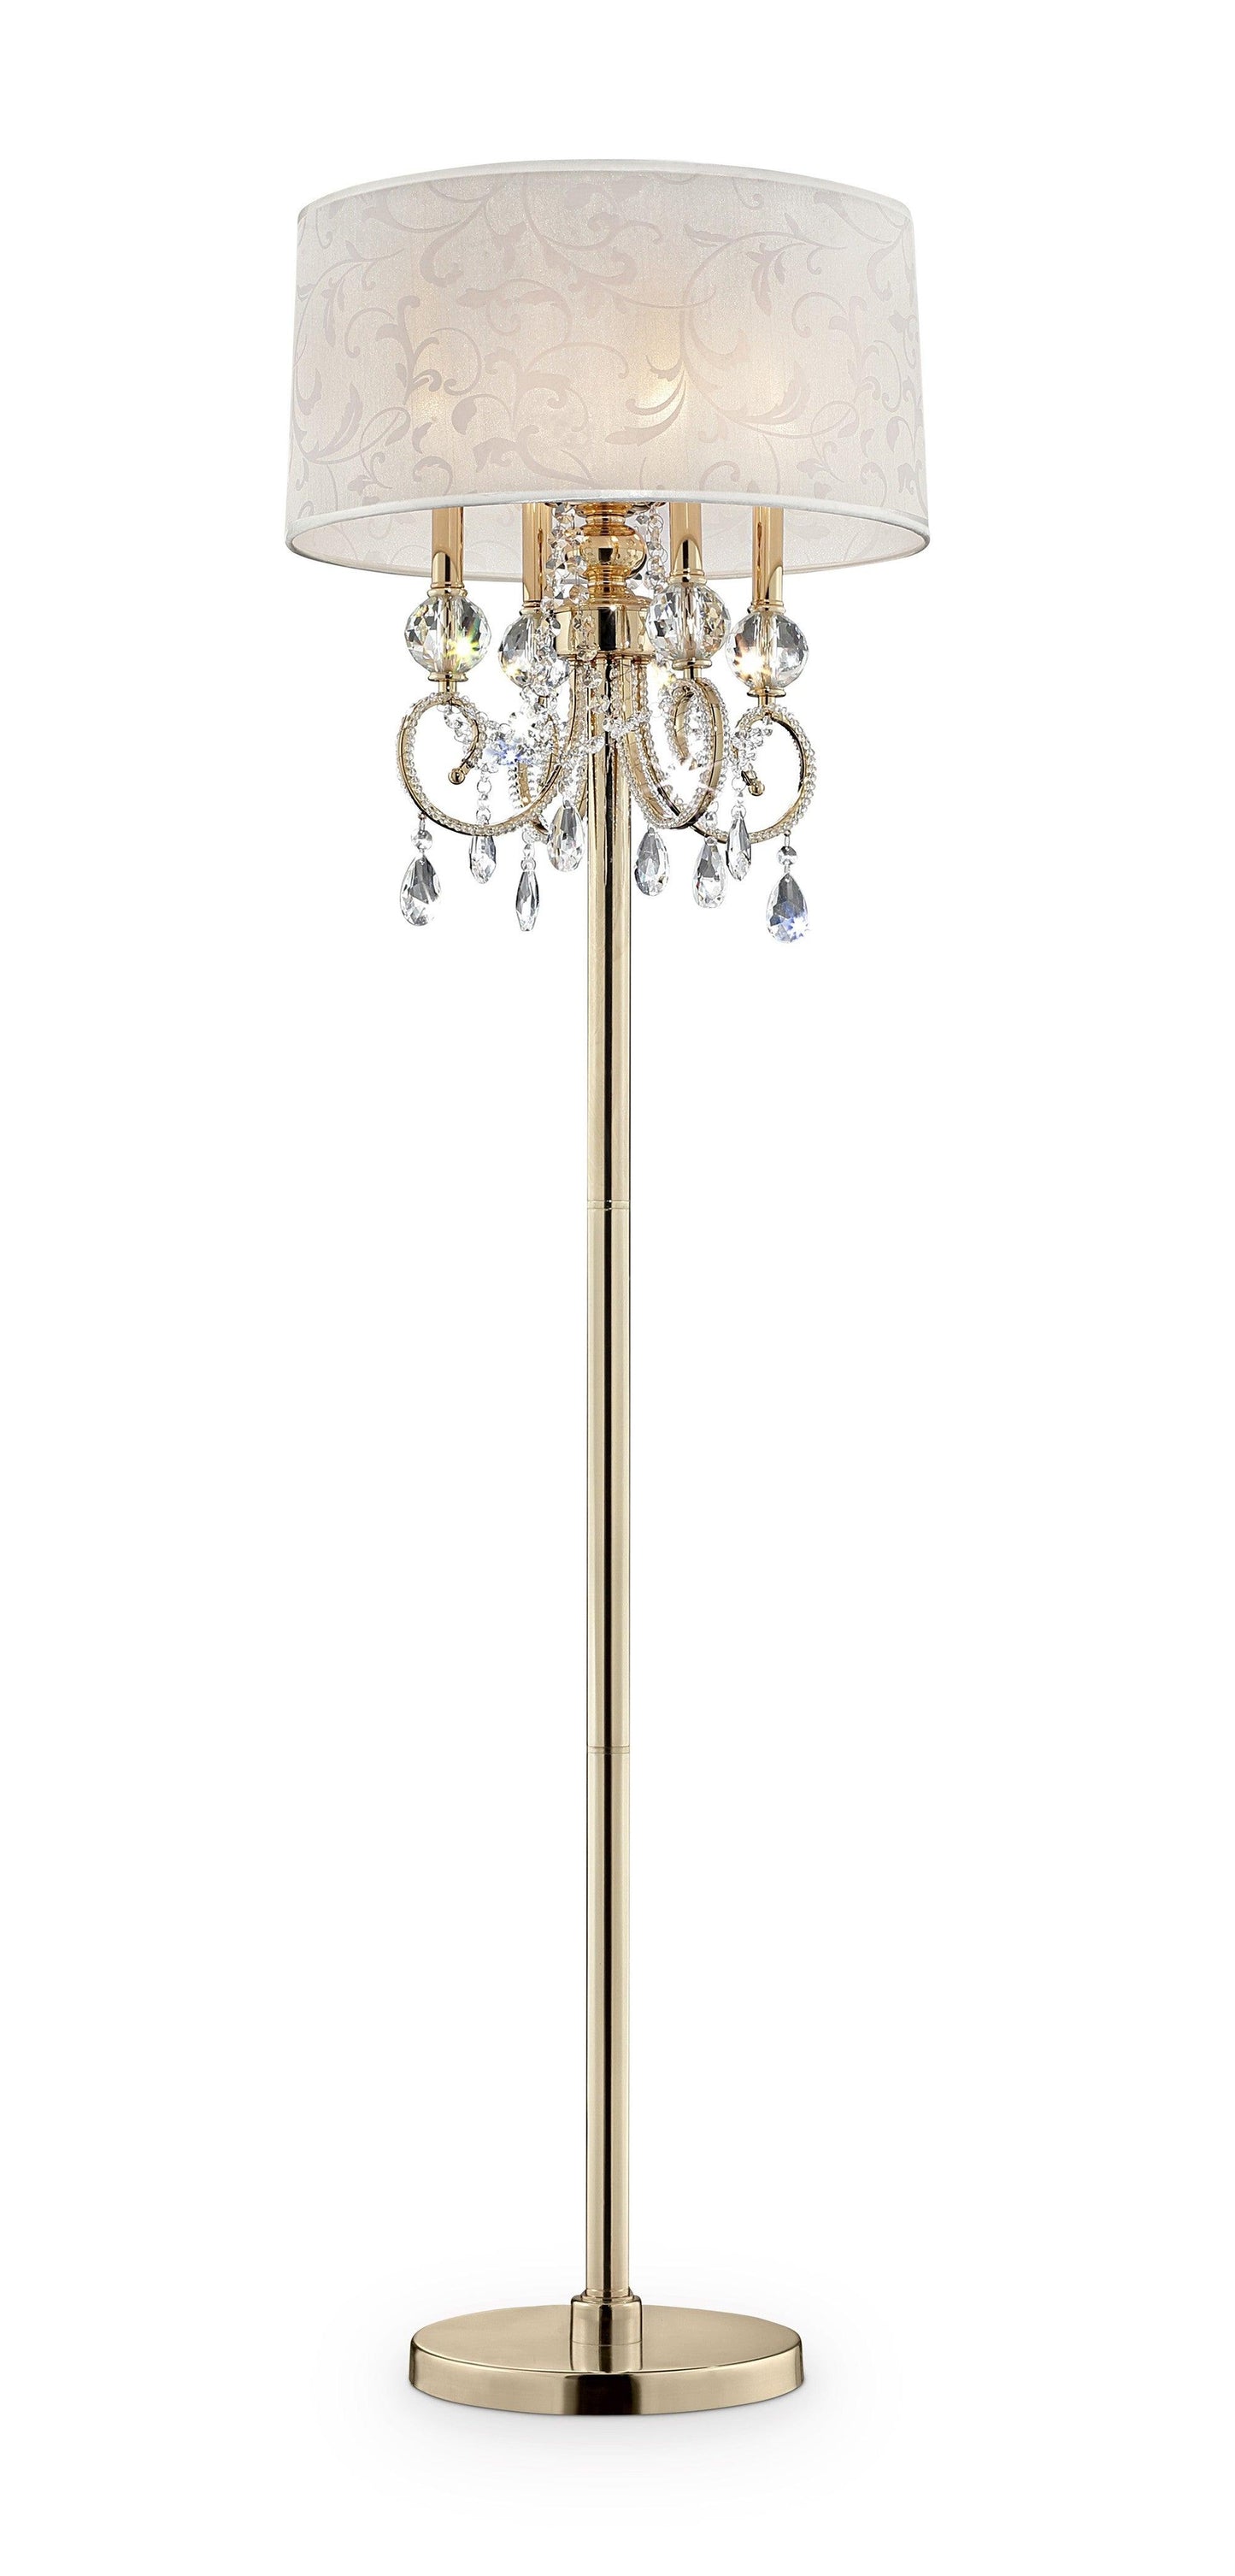 Stunning Brass Gold Finish Floor Lamp with Crystal Accents - AFS